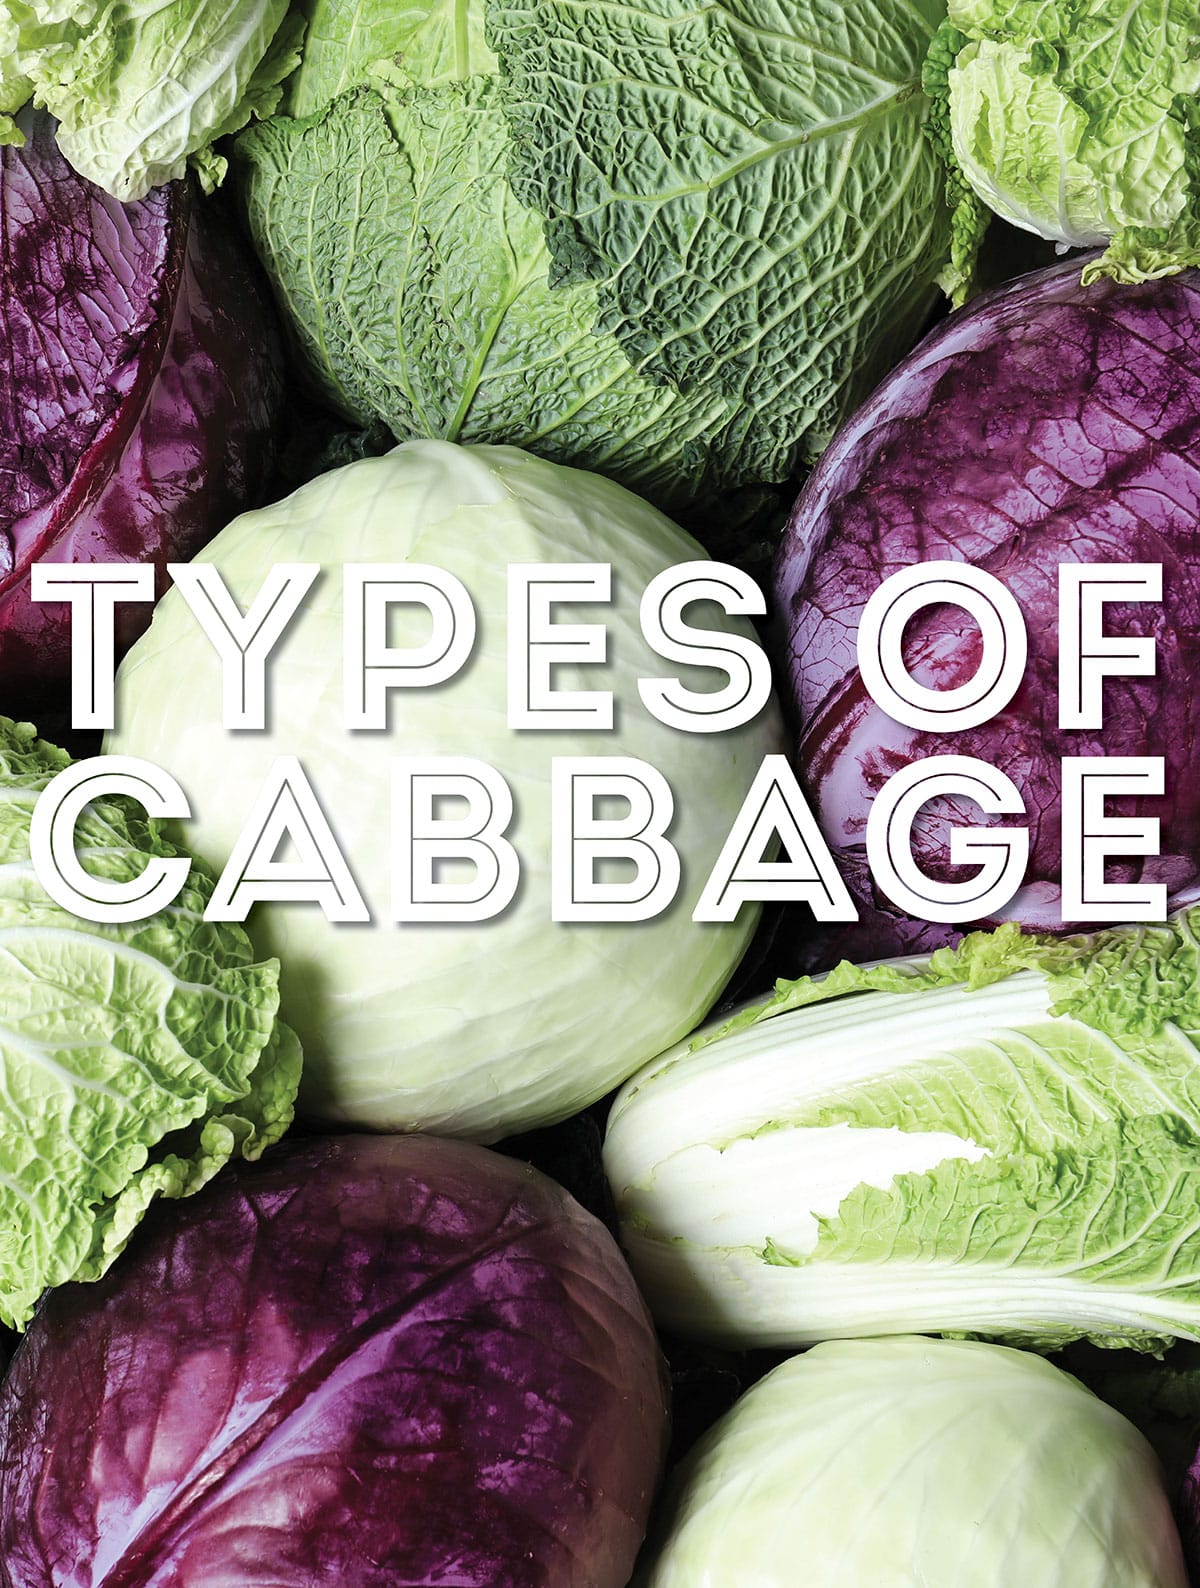 Collage that says "types of cabbage".